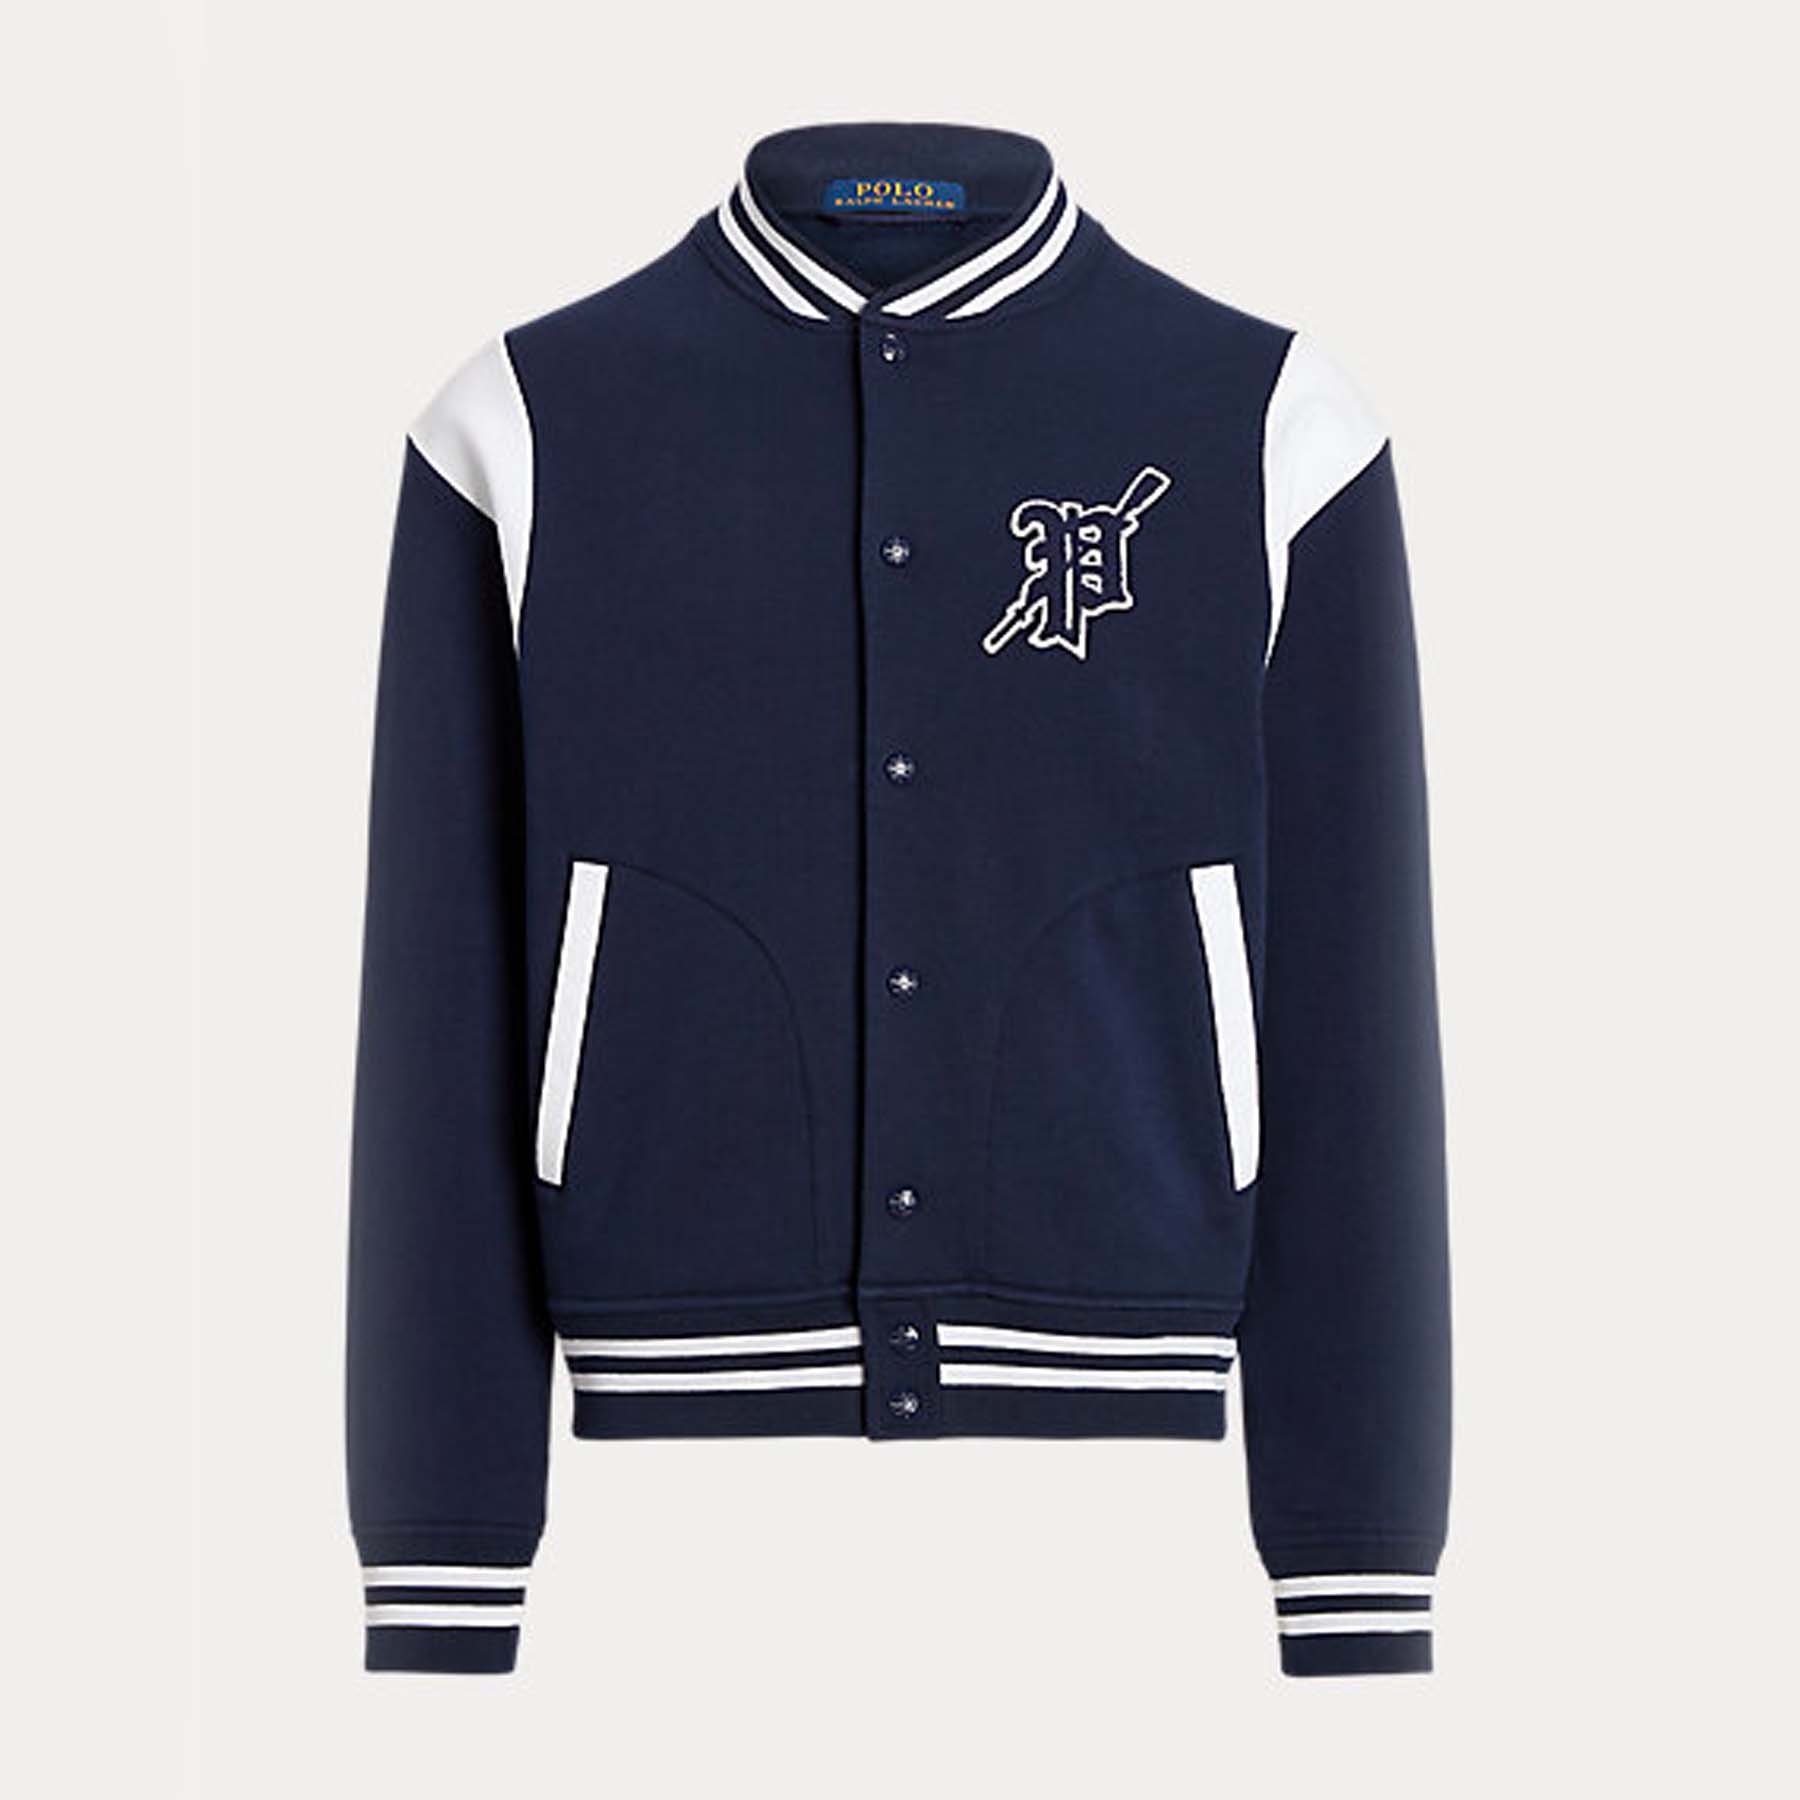 Check Out 14 of Our Favorite Varsity Jackets for Spring?Go Team